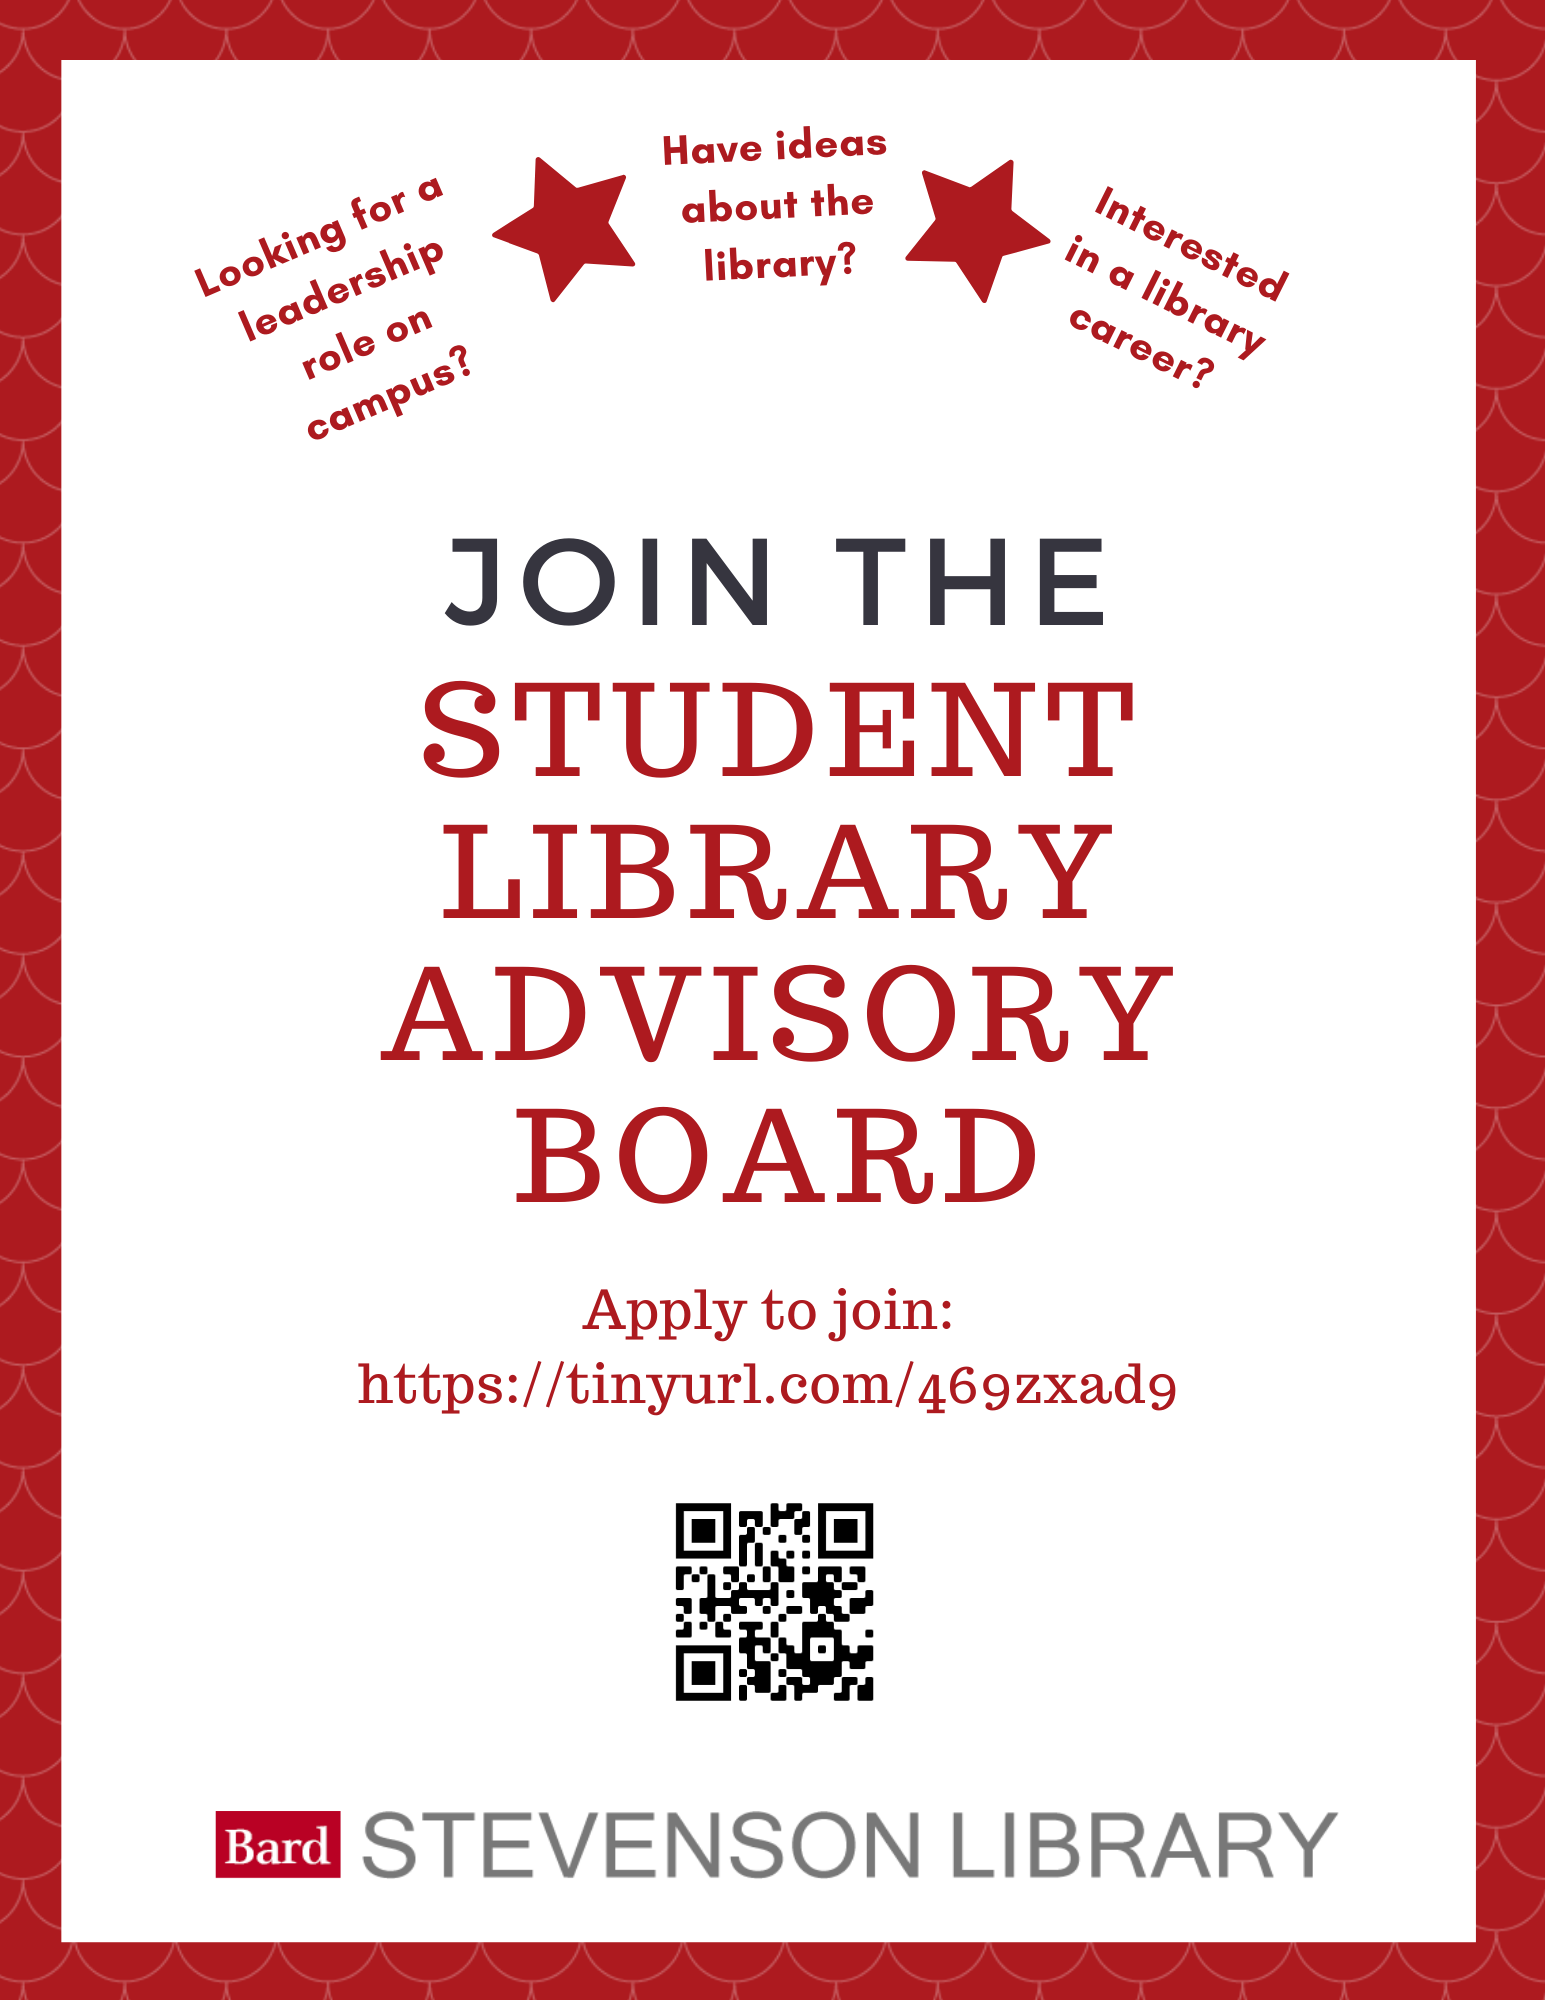 Call for participation: Student Library Advisory Board